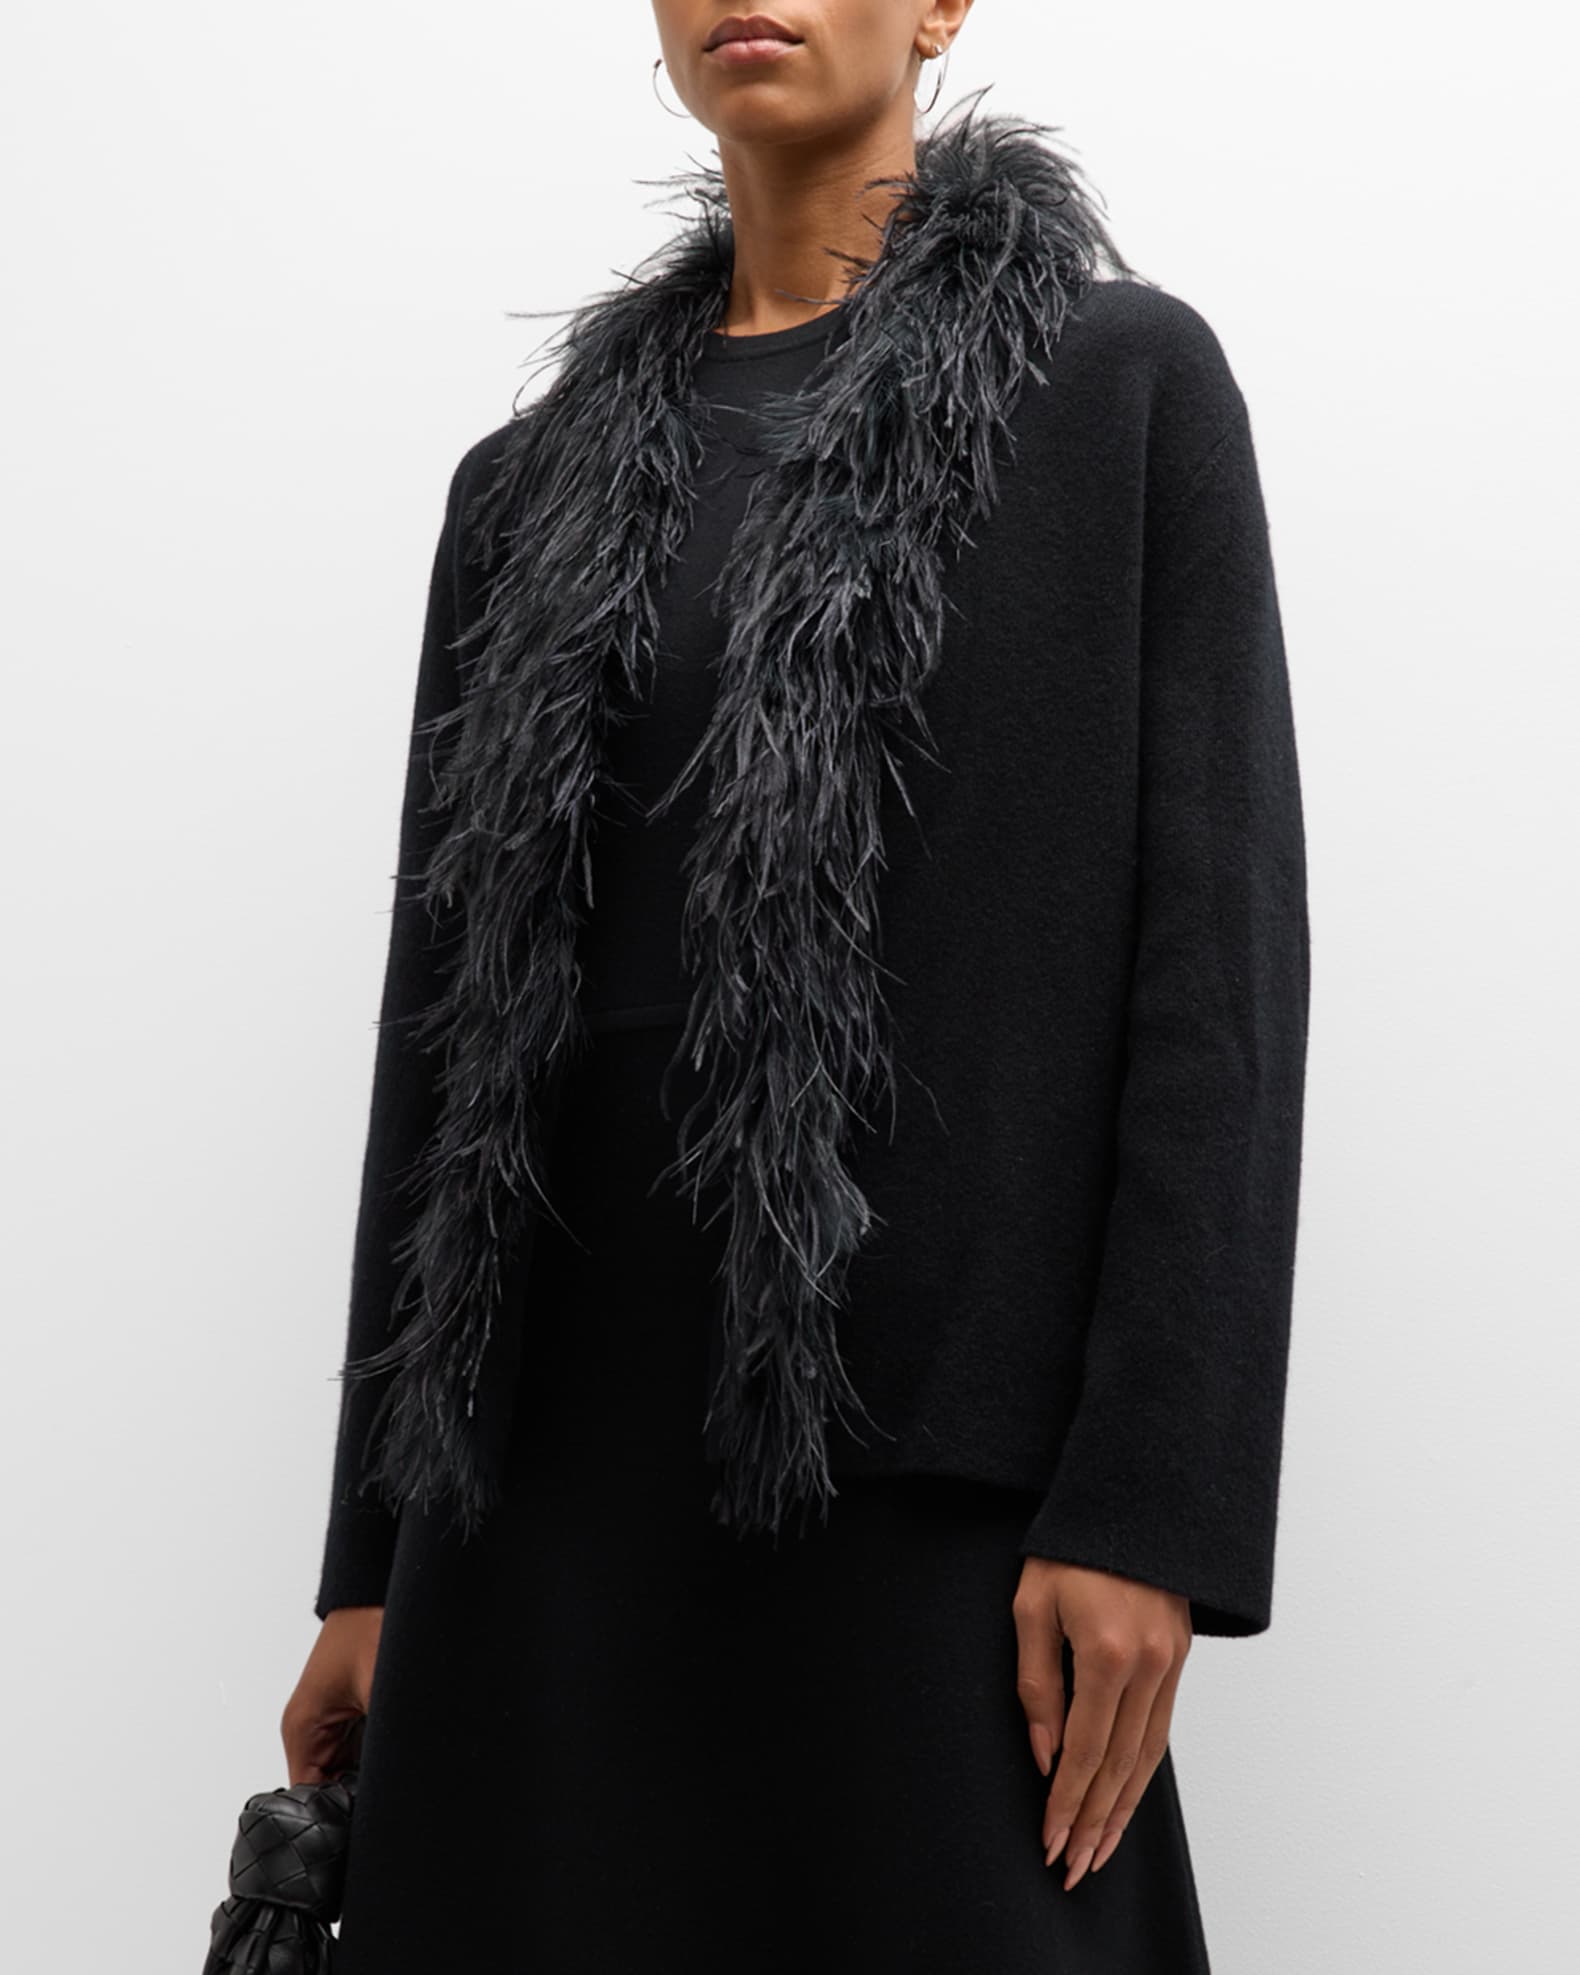 Cashmere Double-Knit Top Coat with Feather Trim